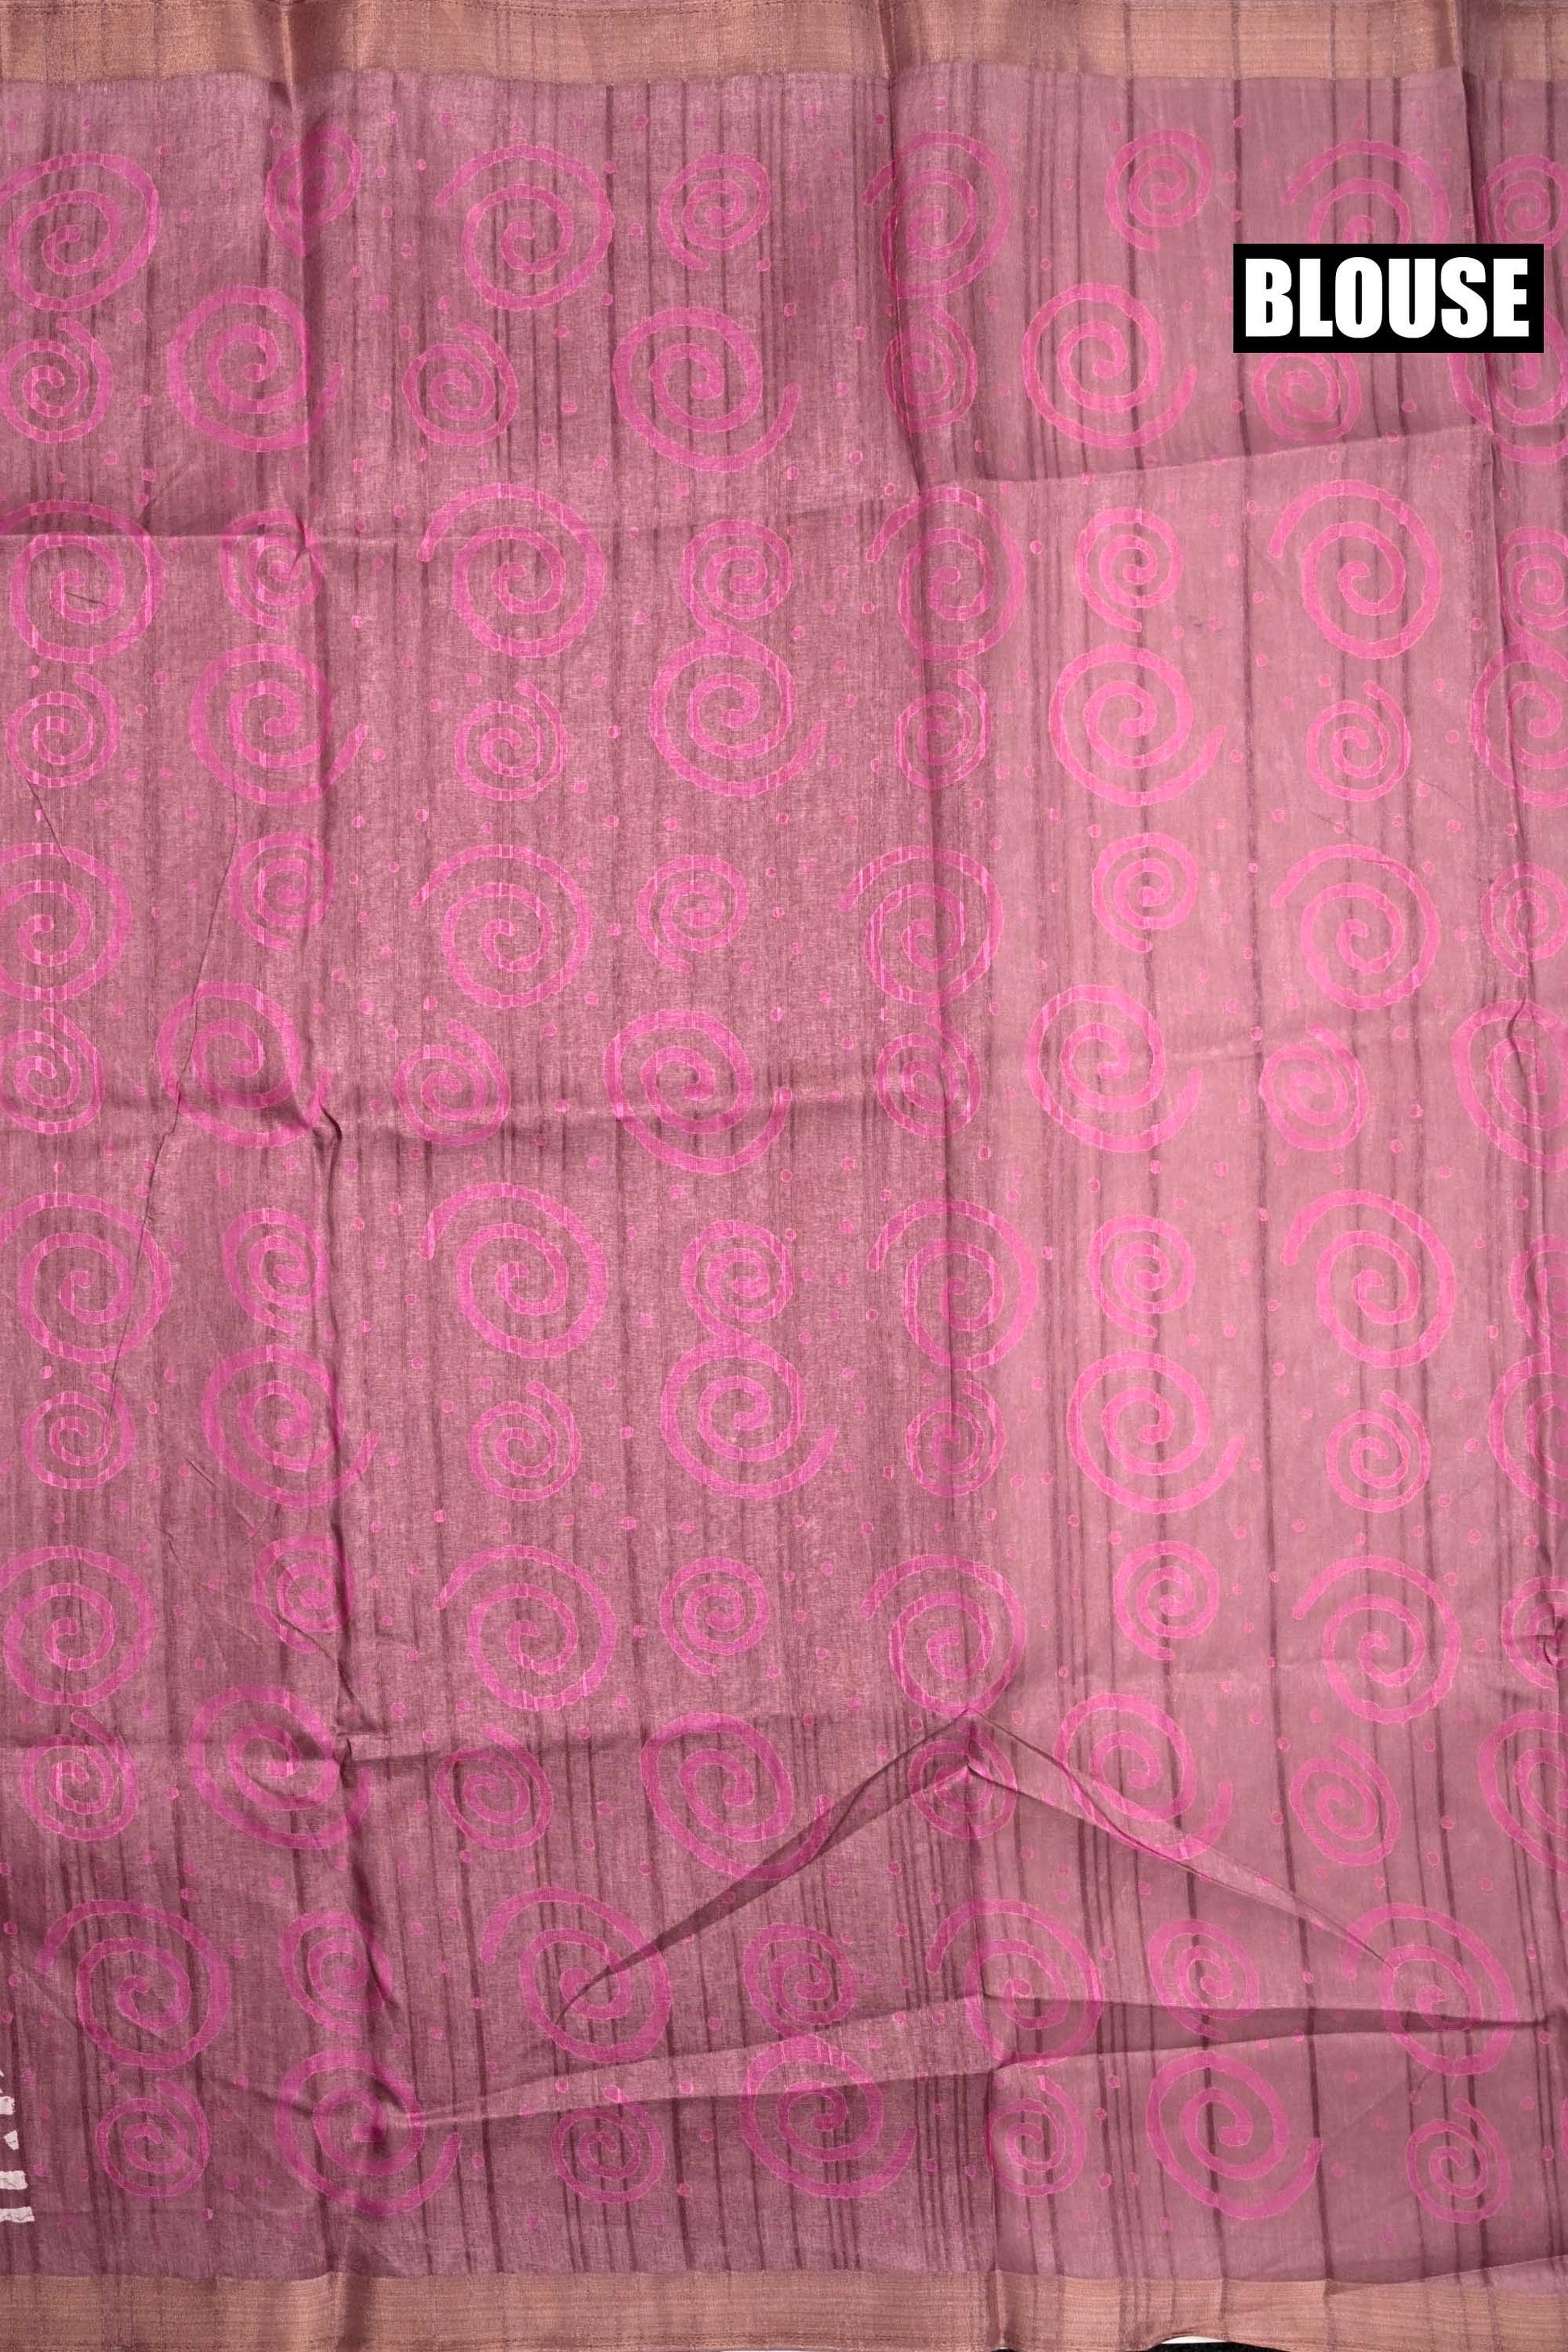 Jute tussar fancy baby pink color allover prints & small printed kaddi border with attached printed blouse